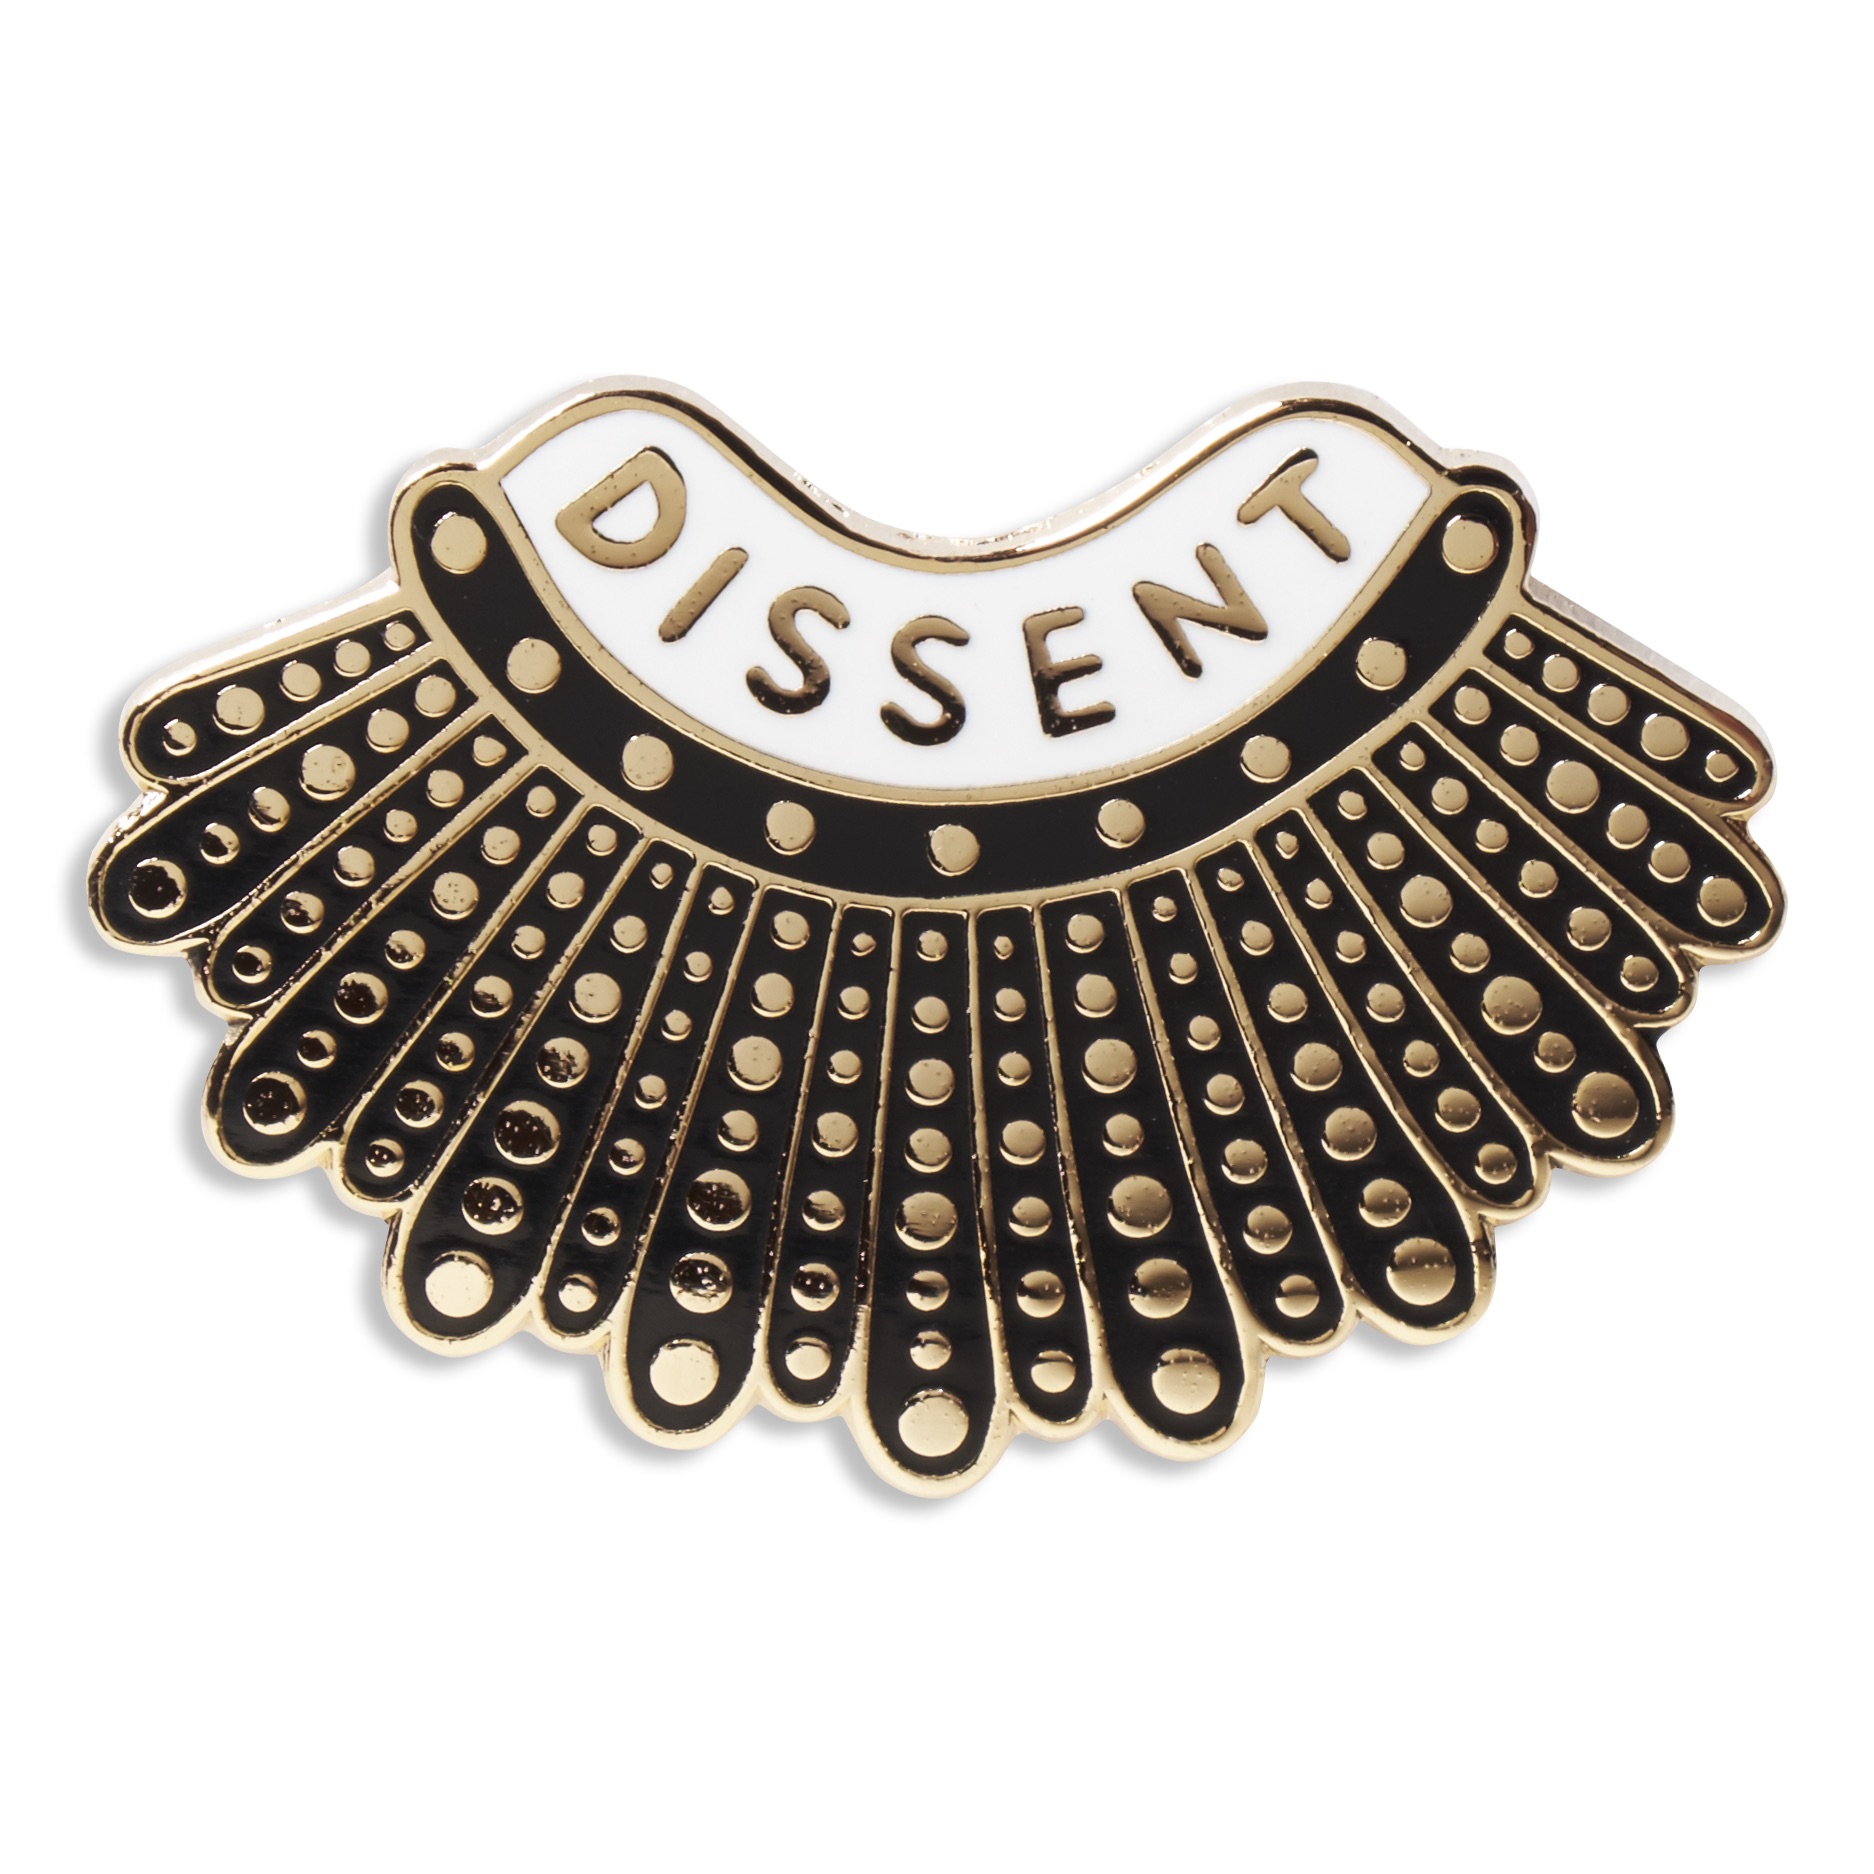 Dissent Collar Pin 
															/ The Found							